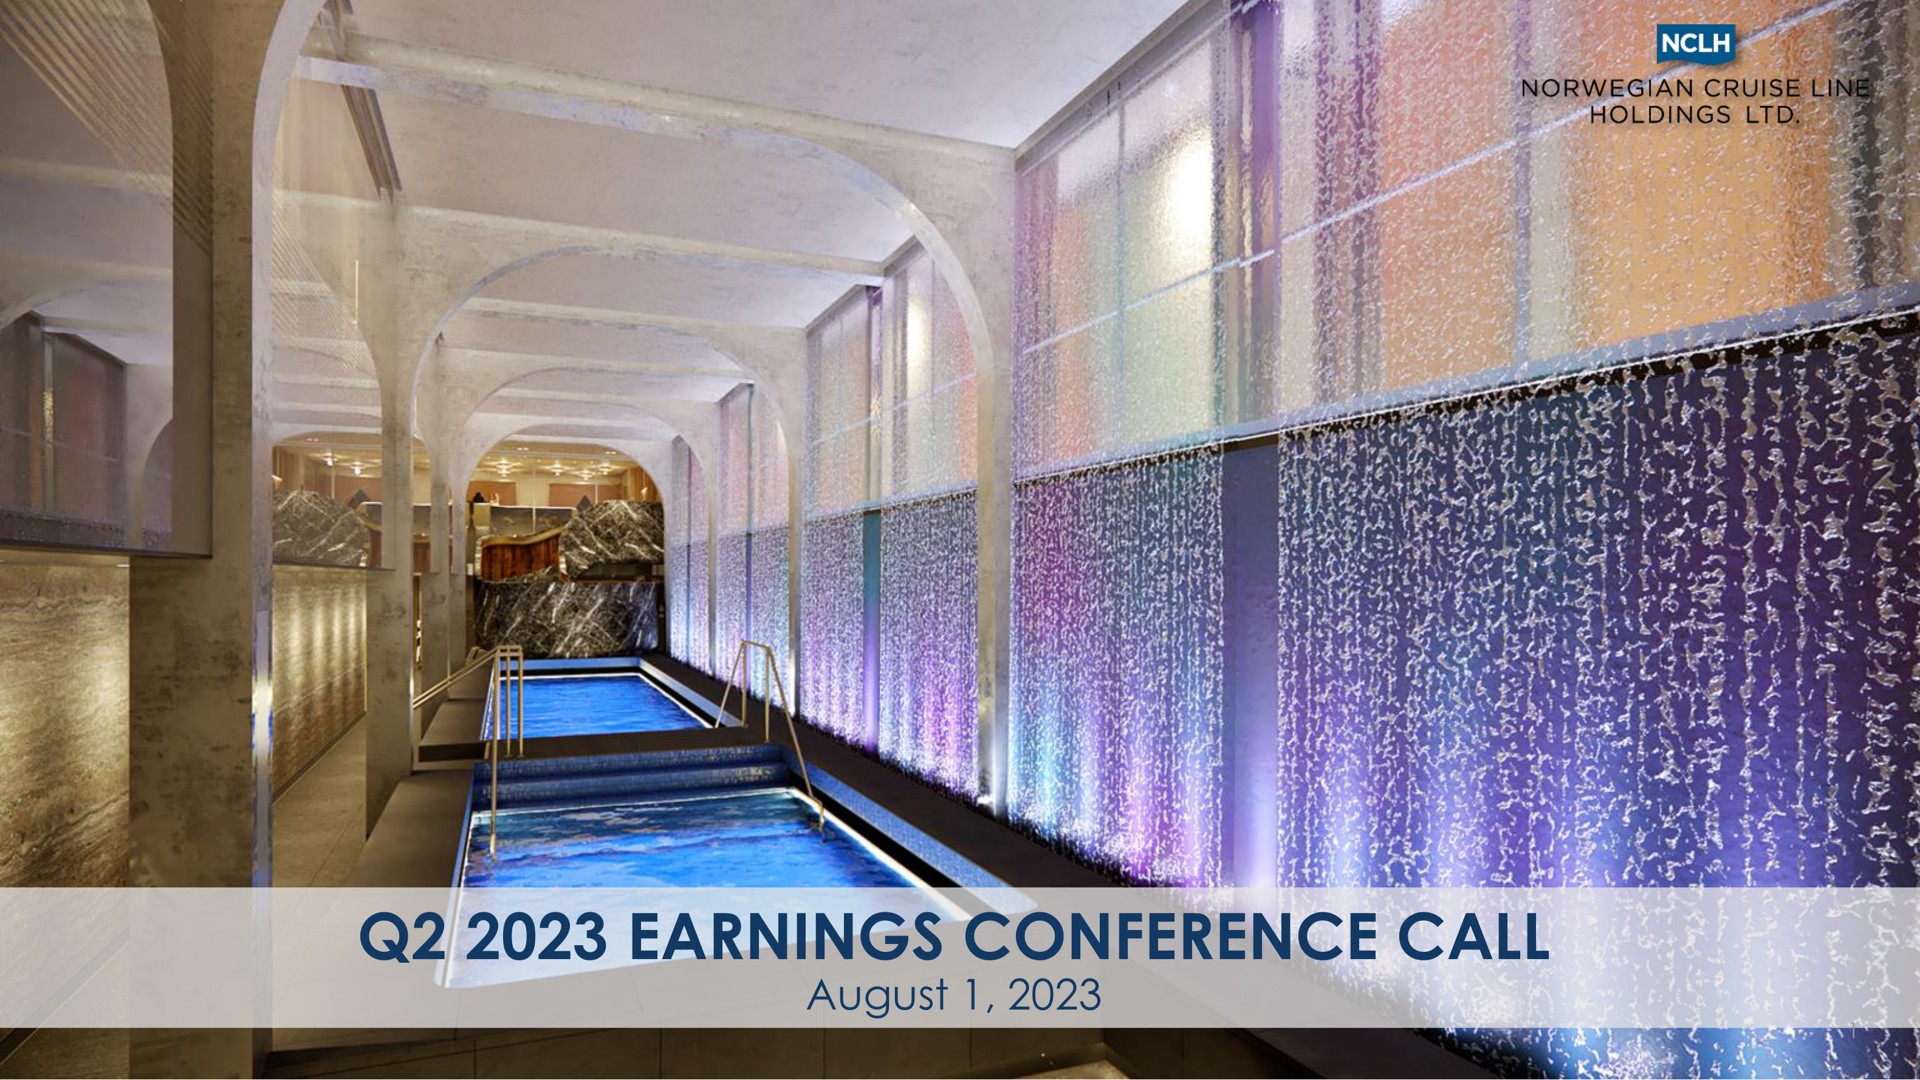 earnings conference call august | Norwegian Cruise Line